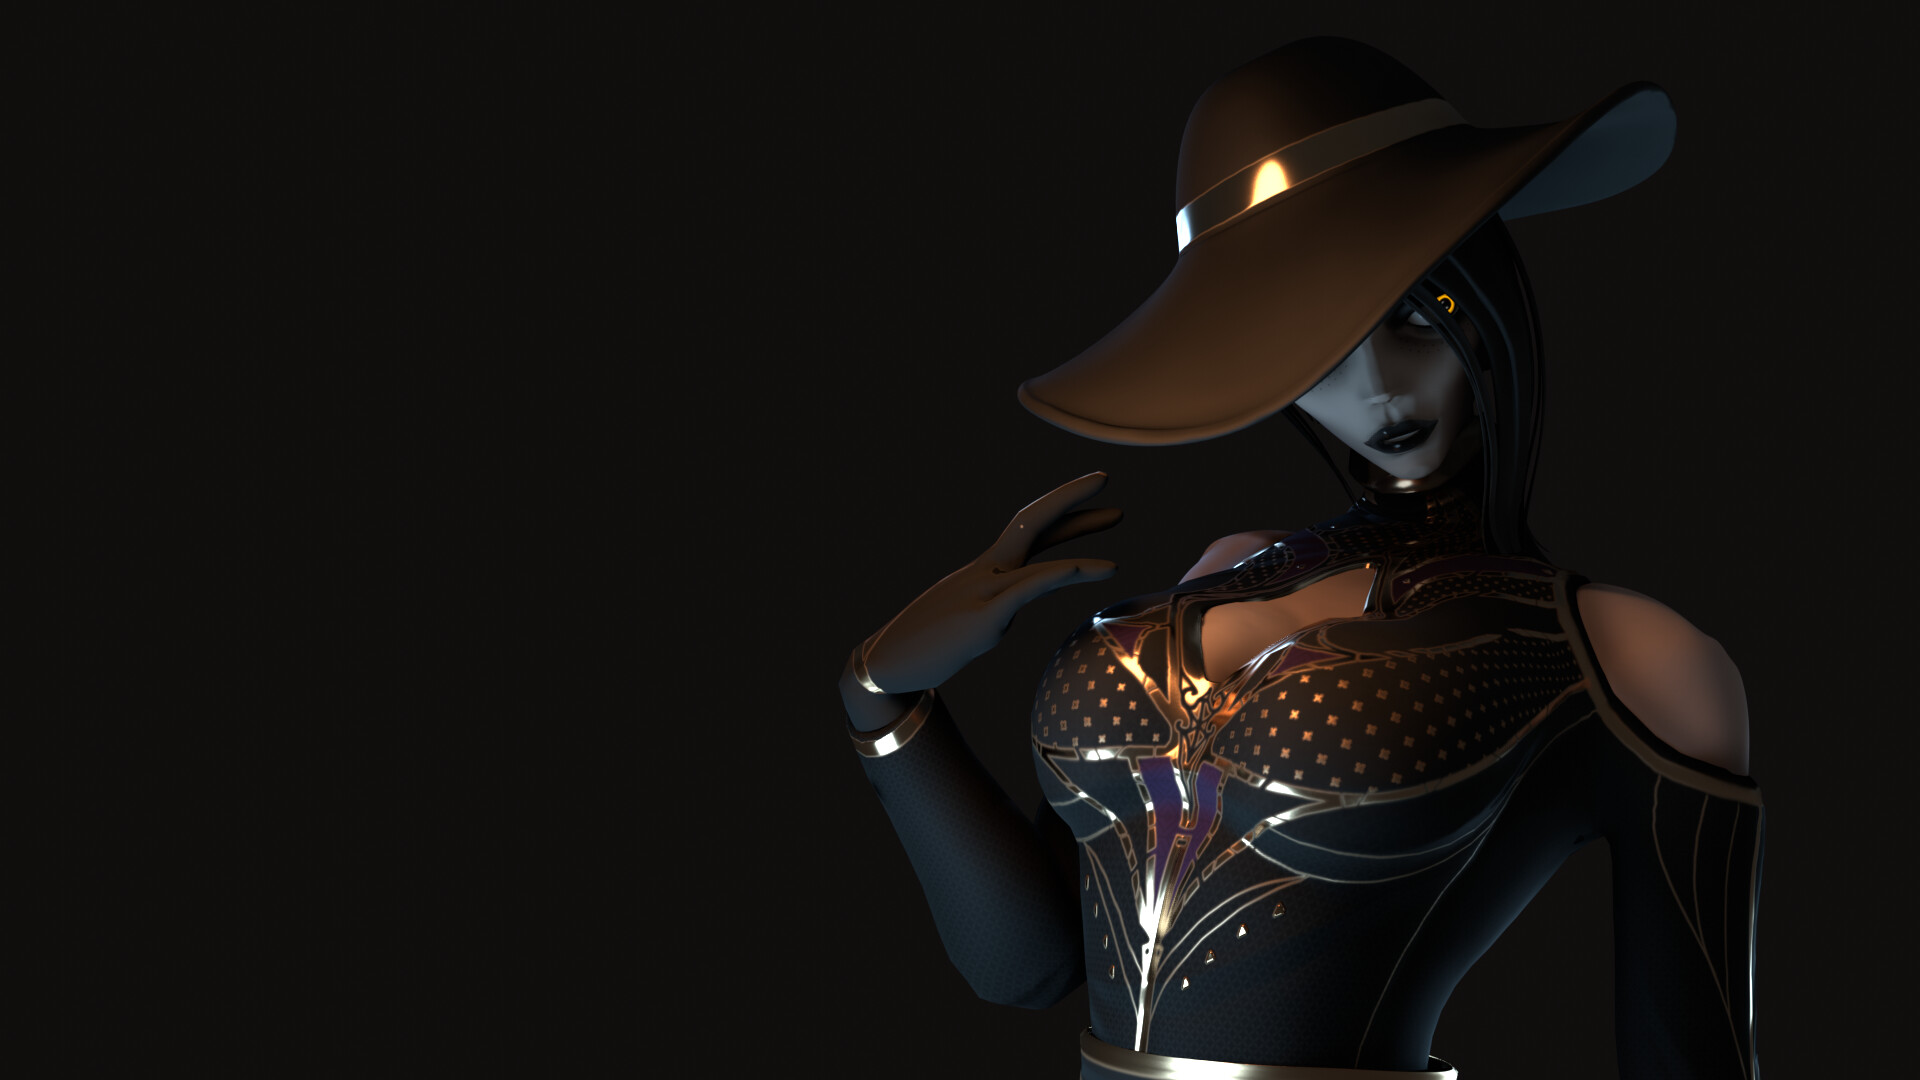 Fantasy Art Witch Sorceress Magician Dark Dress Simple Background Women With Hats Fantasy Girl 1920x1080